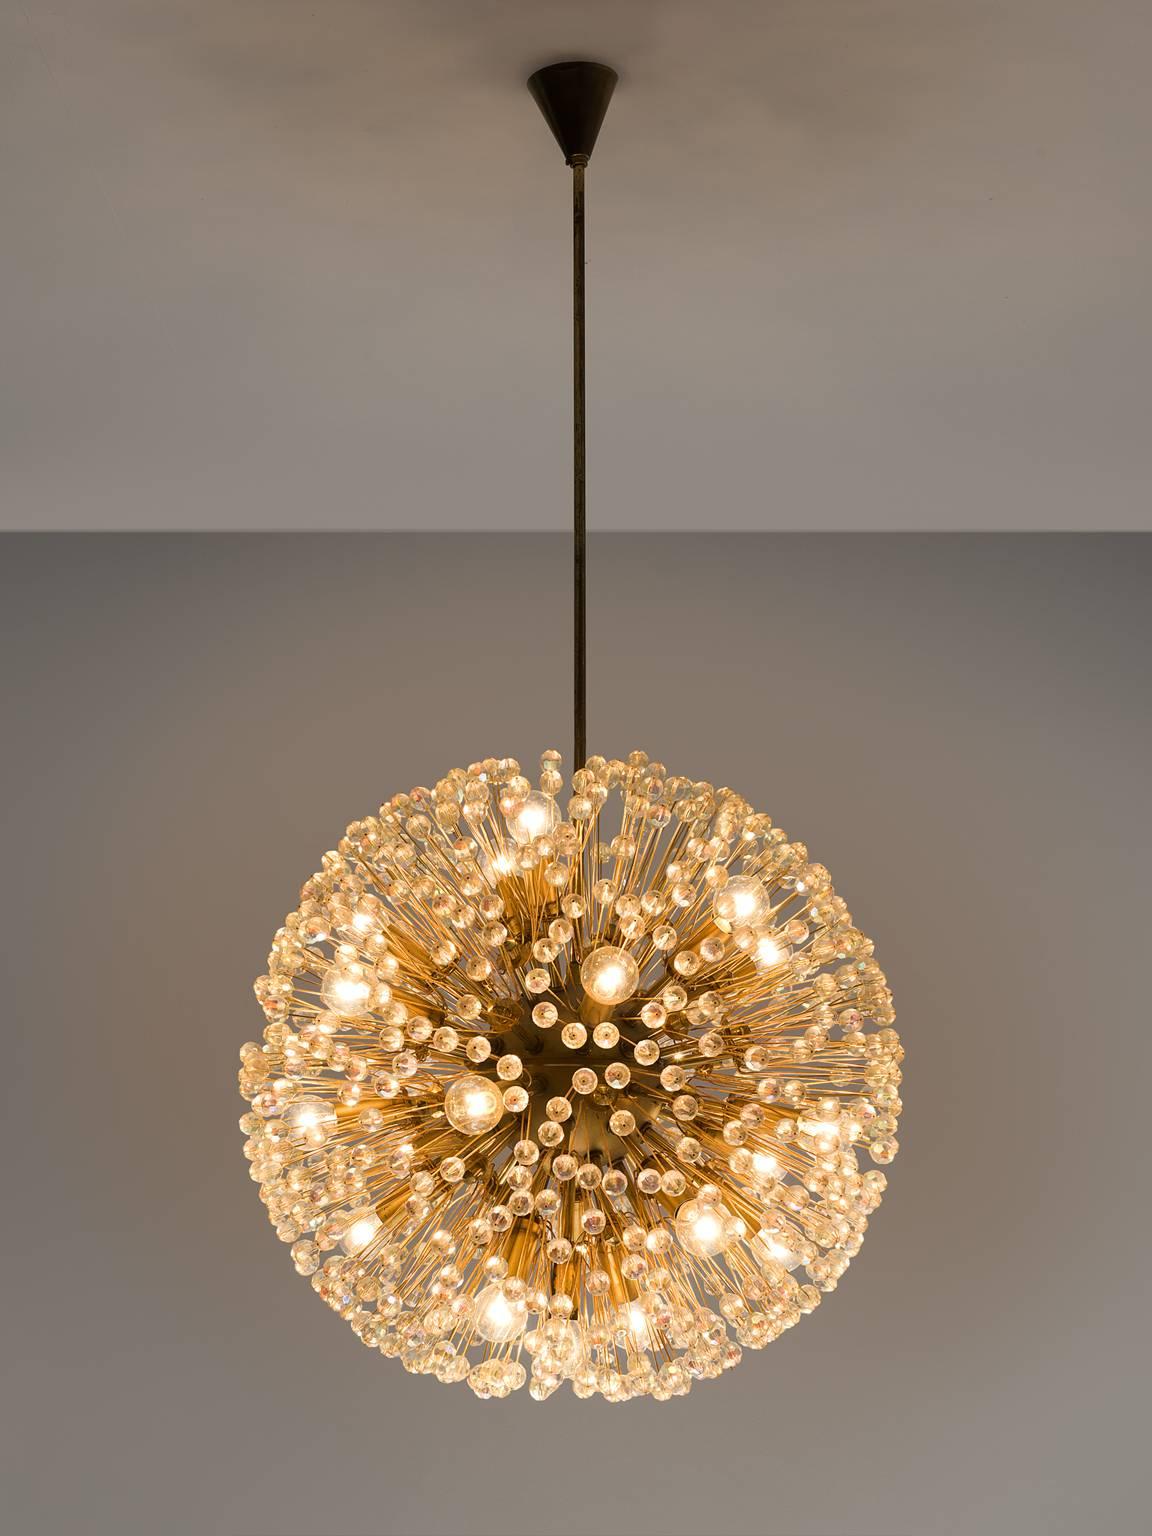 'Sputnik' chandeliers, in the style of Emil Stejnar for Rupert Nikoll, brass and glass, Austria, 1960s.

The brass sputnik shaped frame is very elegantly finished with several diamond shaped glass ornaments and faceted glass beads. The glass